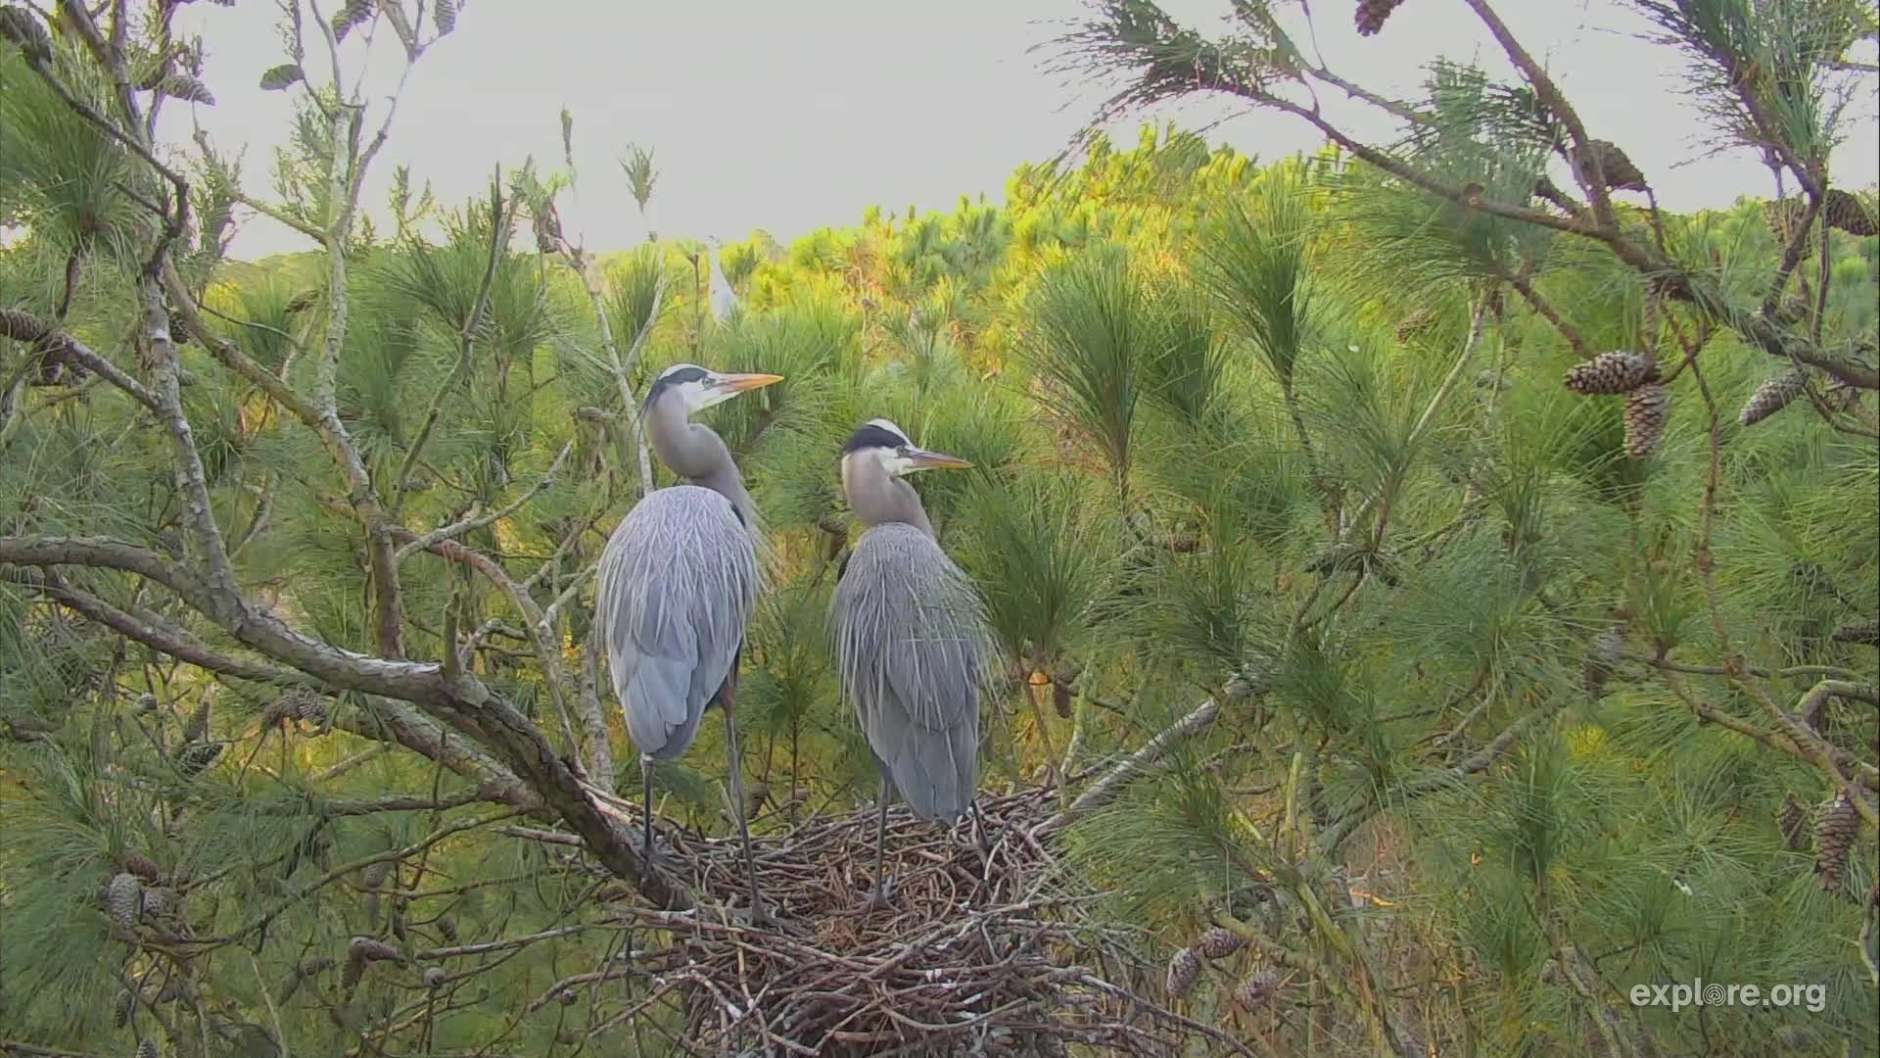 These birds, pictured Feb. 18, are perched 80 feet high in loblolly pine trees on Maryland's Eastern Shore. The nest's exact location is secret to help ensure they're not disturbed by curious bird enthusiasts. (Courtesy of the Chesapeake Conservancy)